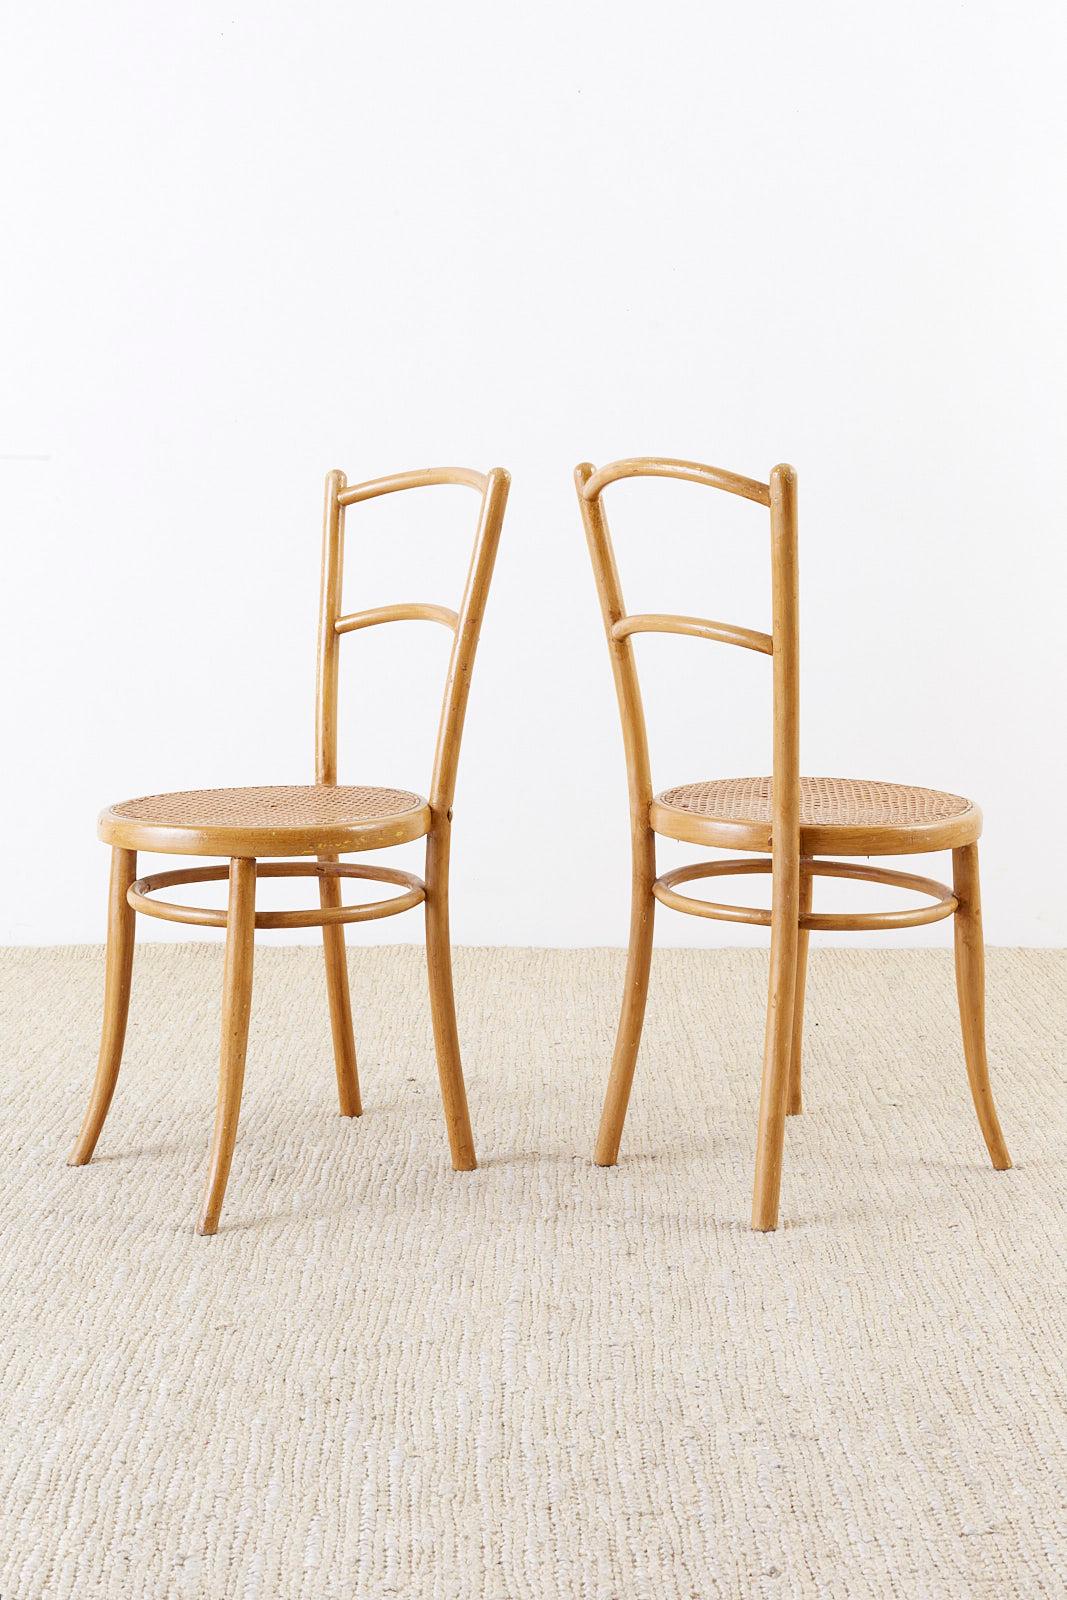 20th Century Pair of J. and J. Kohn Austrian Bentwood and Cane Chairs For Sale